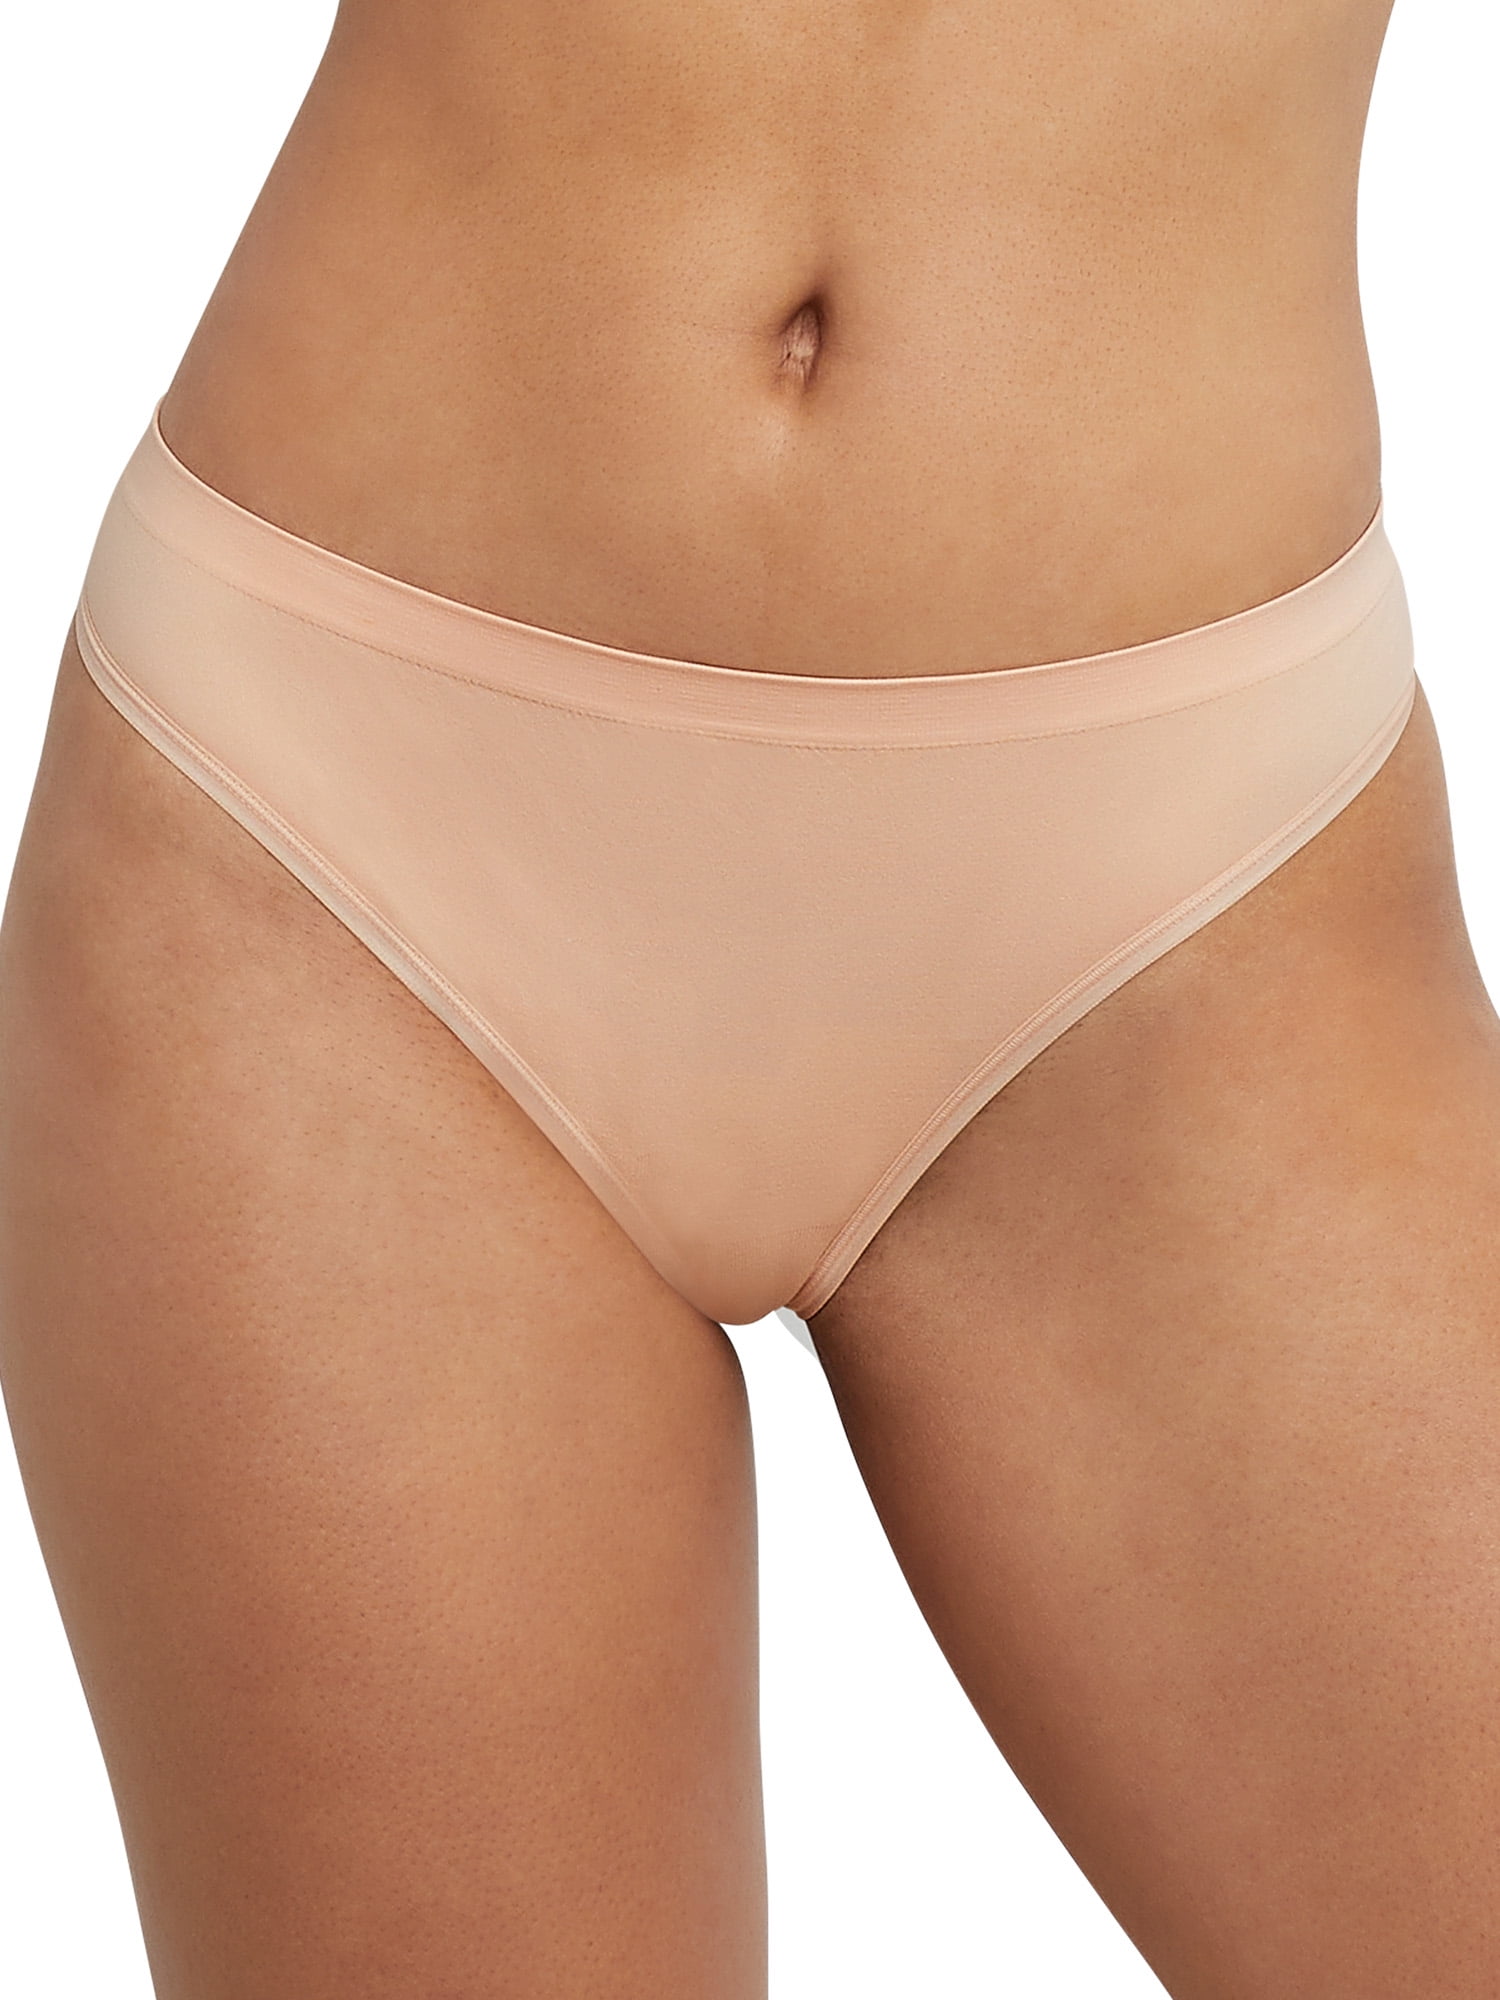 Hanes Women's Comfort Flex Fit Thong - 4 Pack, 46CFF4, Cantaloupe Assorted,  9